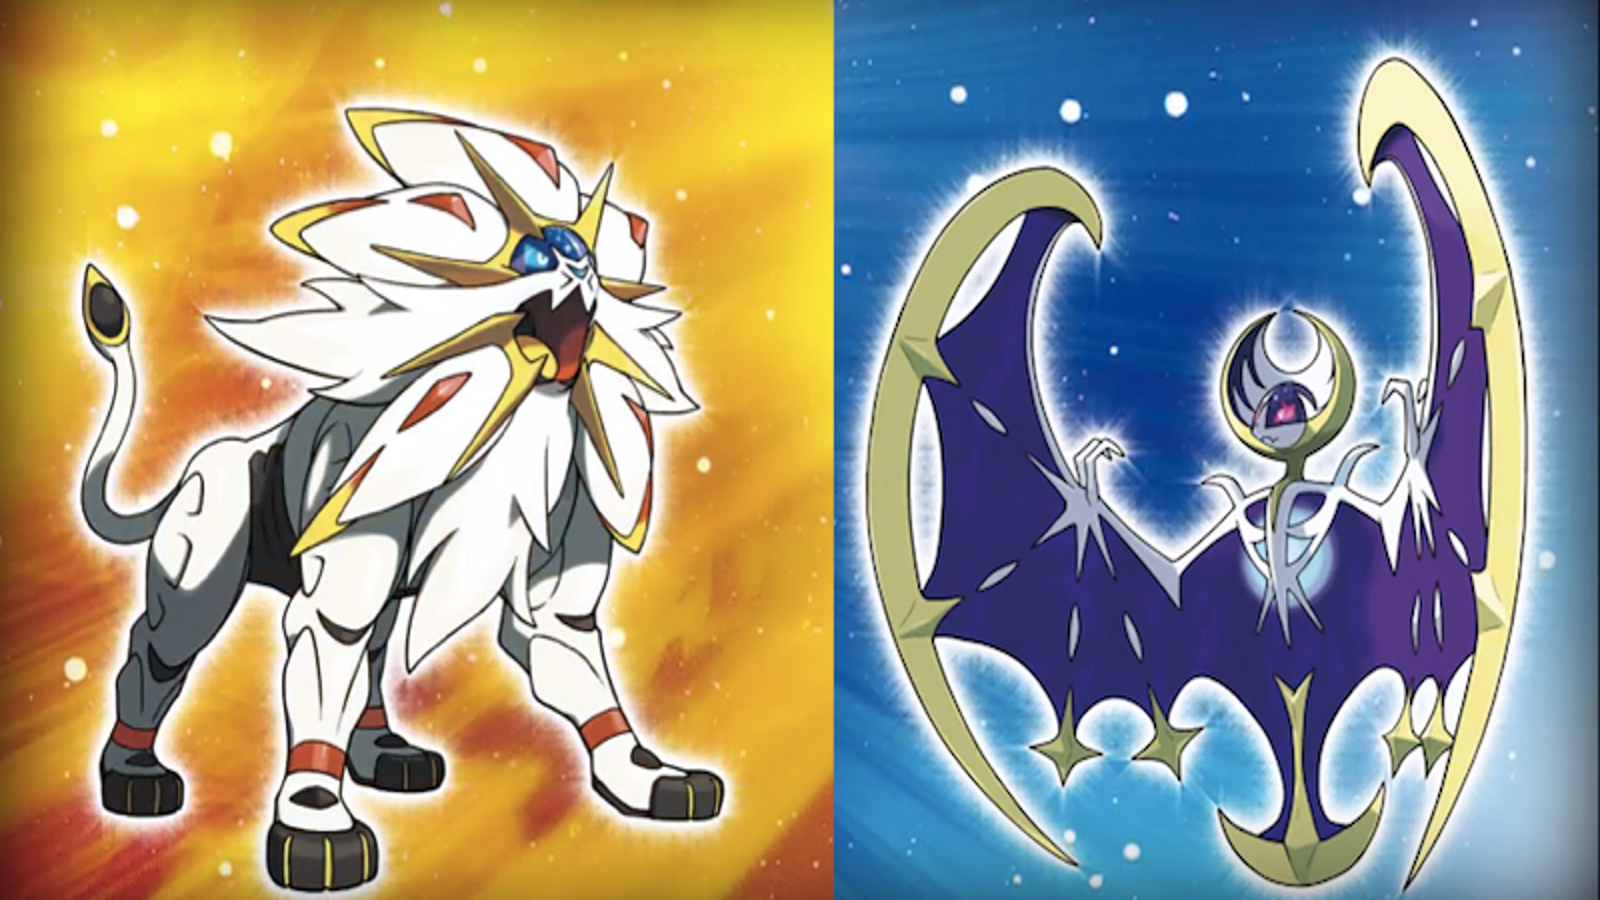 Differences between original sun/moon and ultra sun/moon? : r/3DS